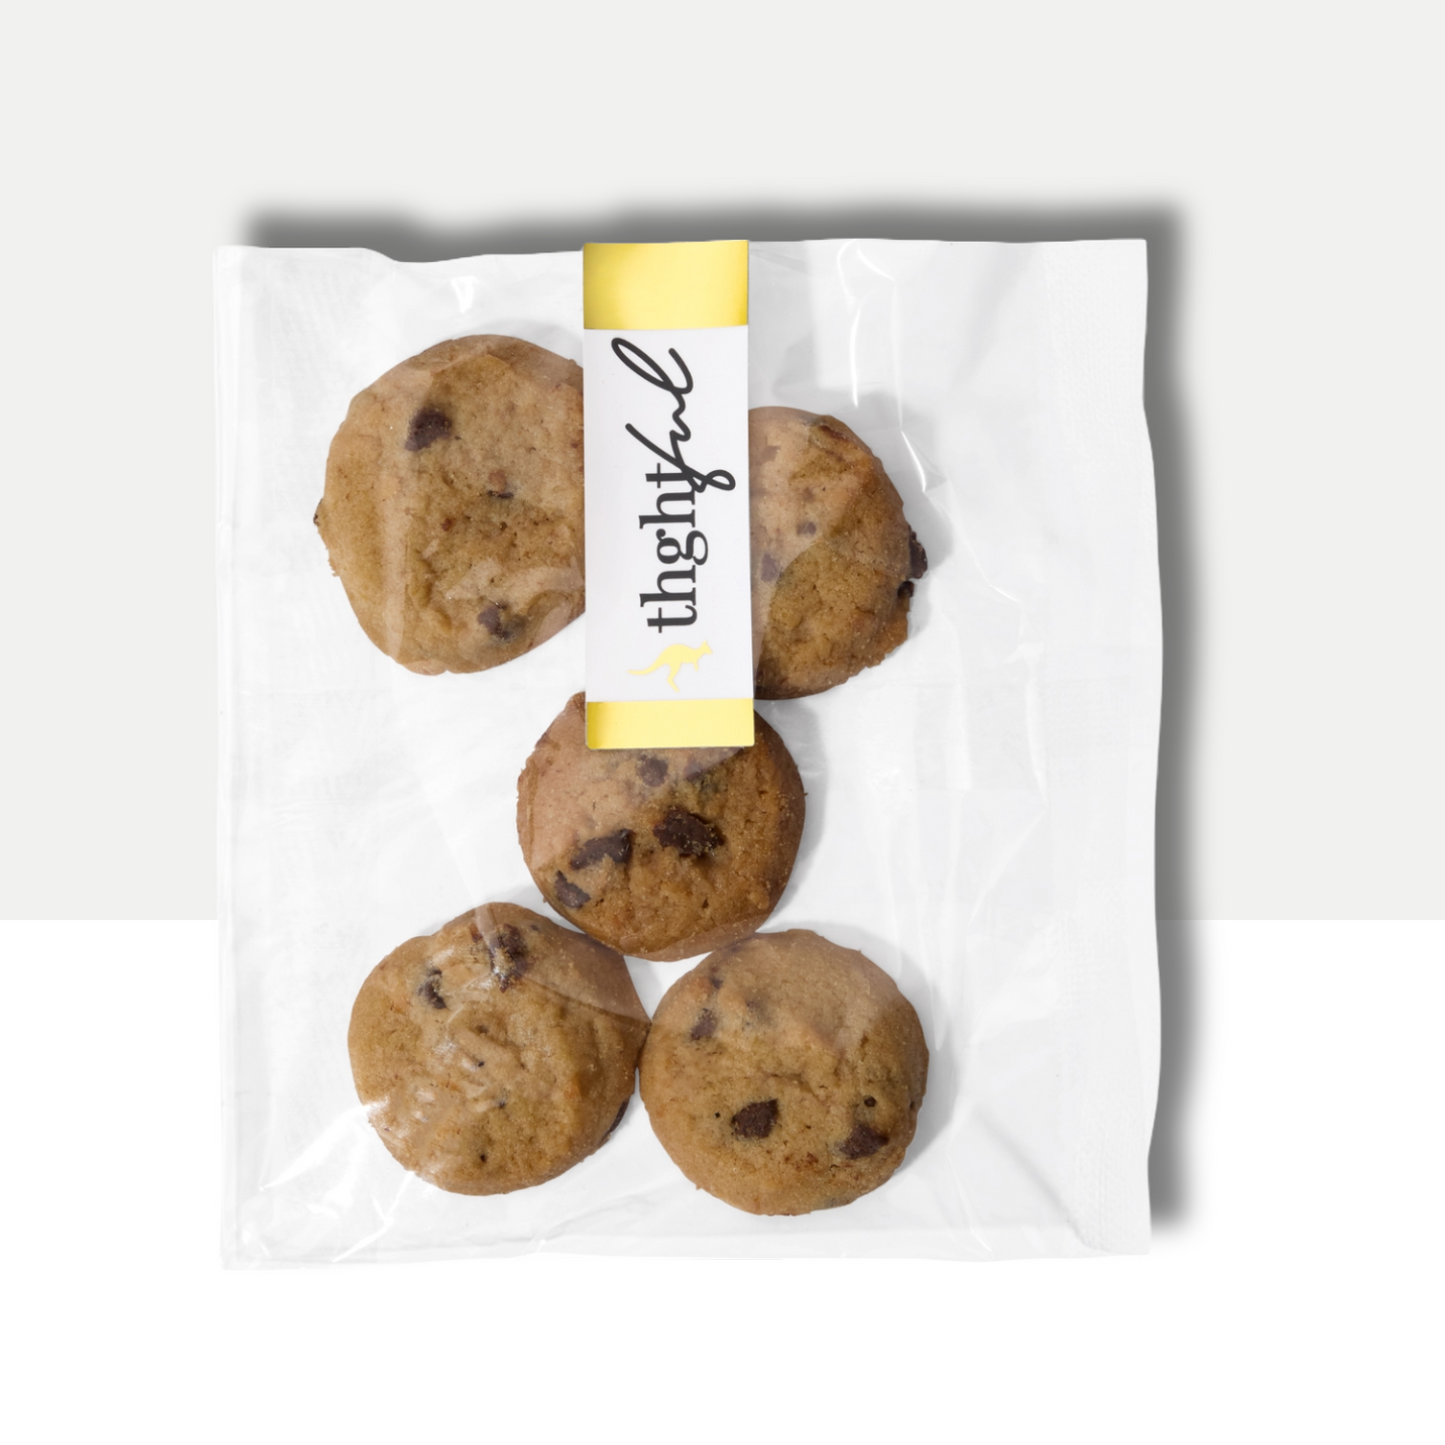 Wholesale Chocolate Chip Cookie 25g x 100 ($2.50 each)